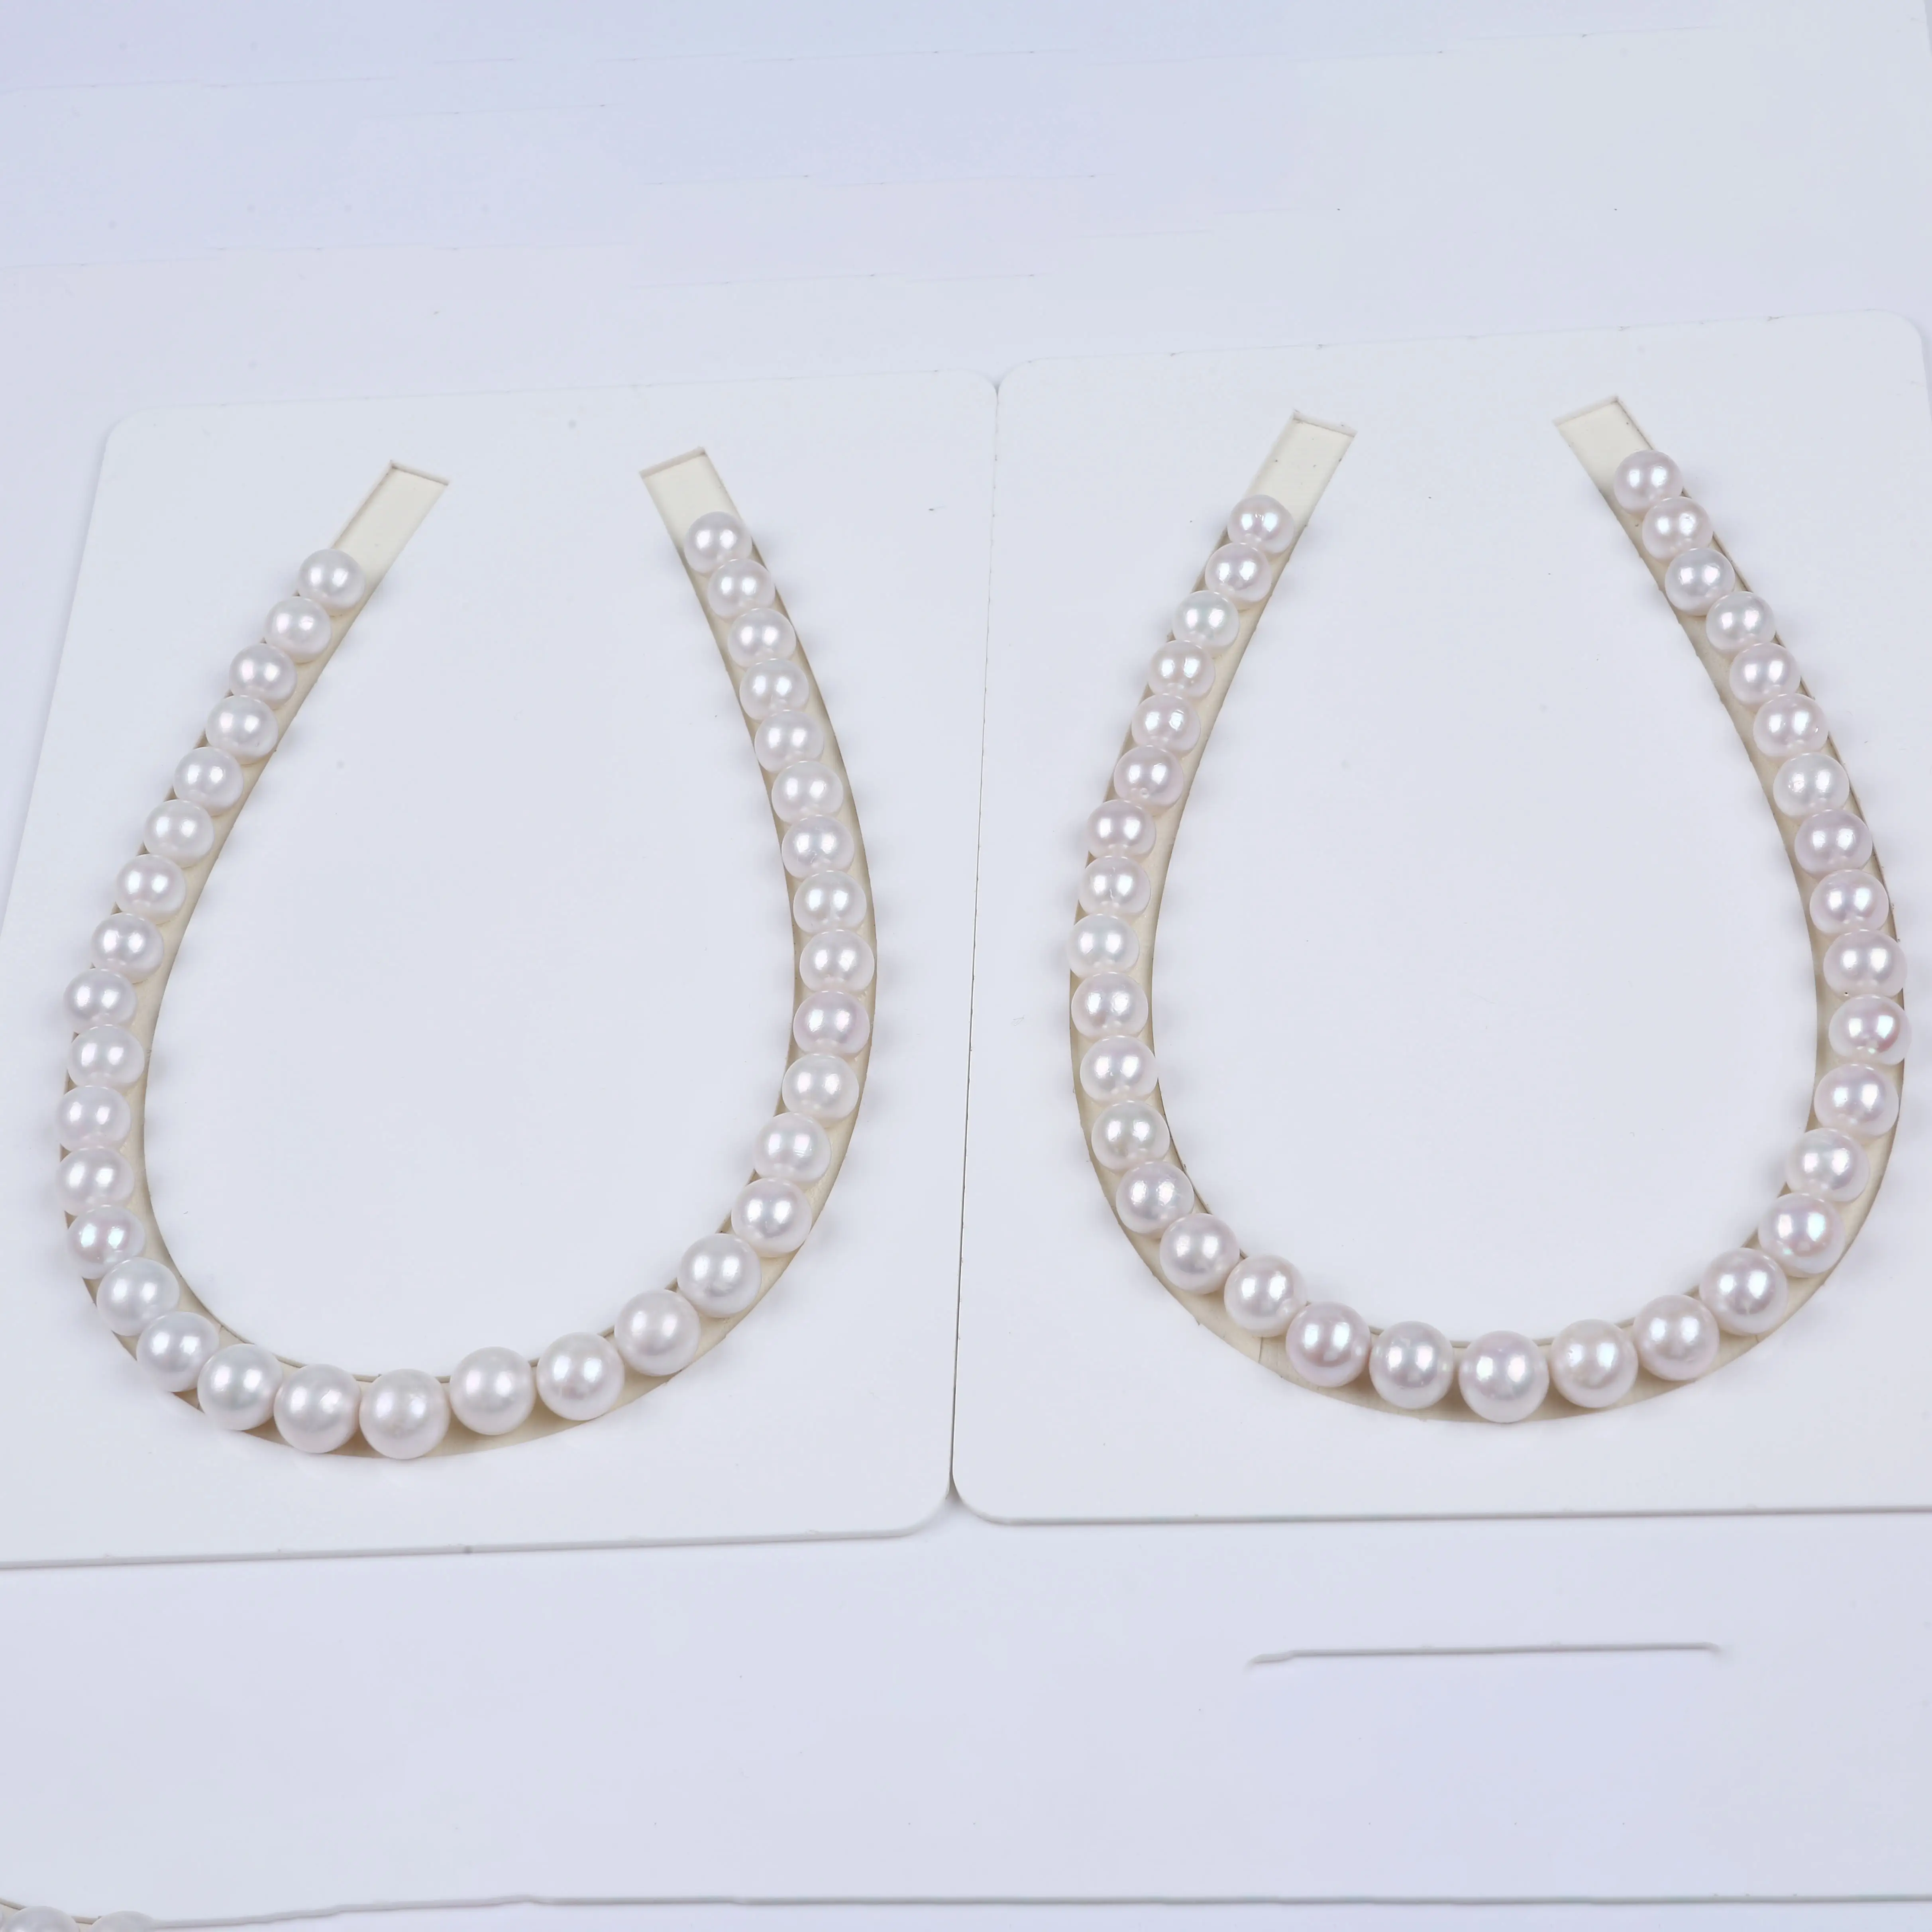 

Natural 10-13mm A Grade White Round Edison Shape Baroque Freshwater Pearl for Jewelry Making